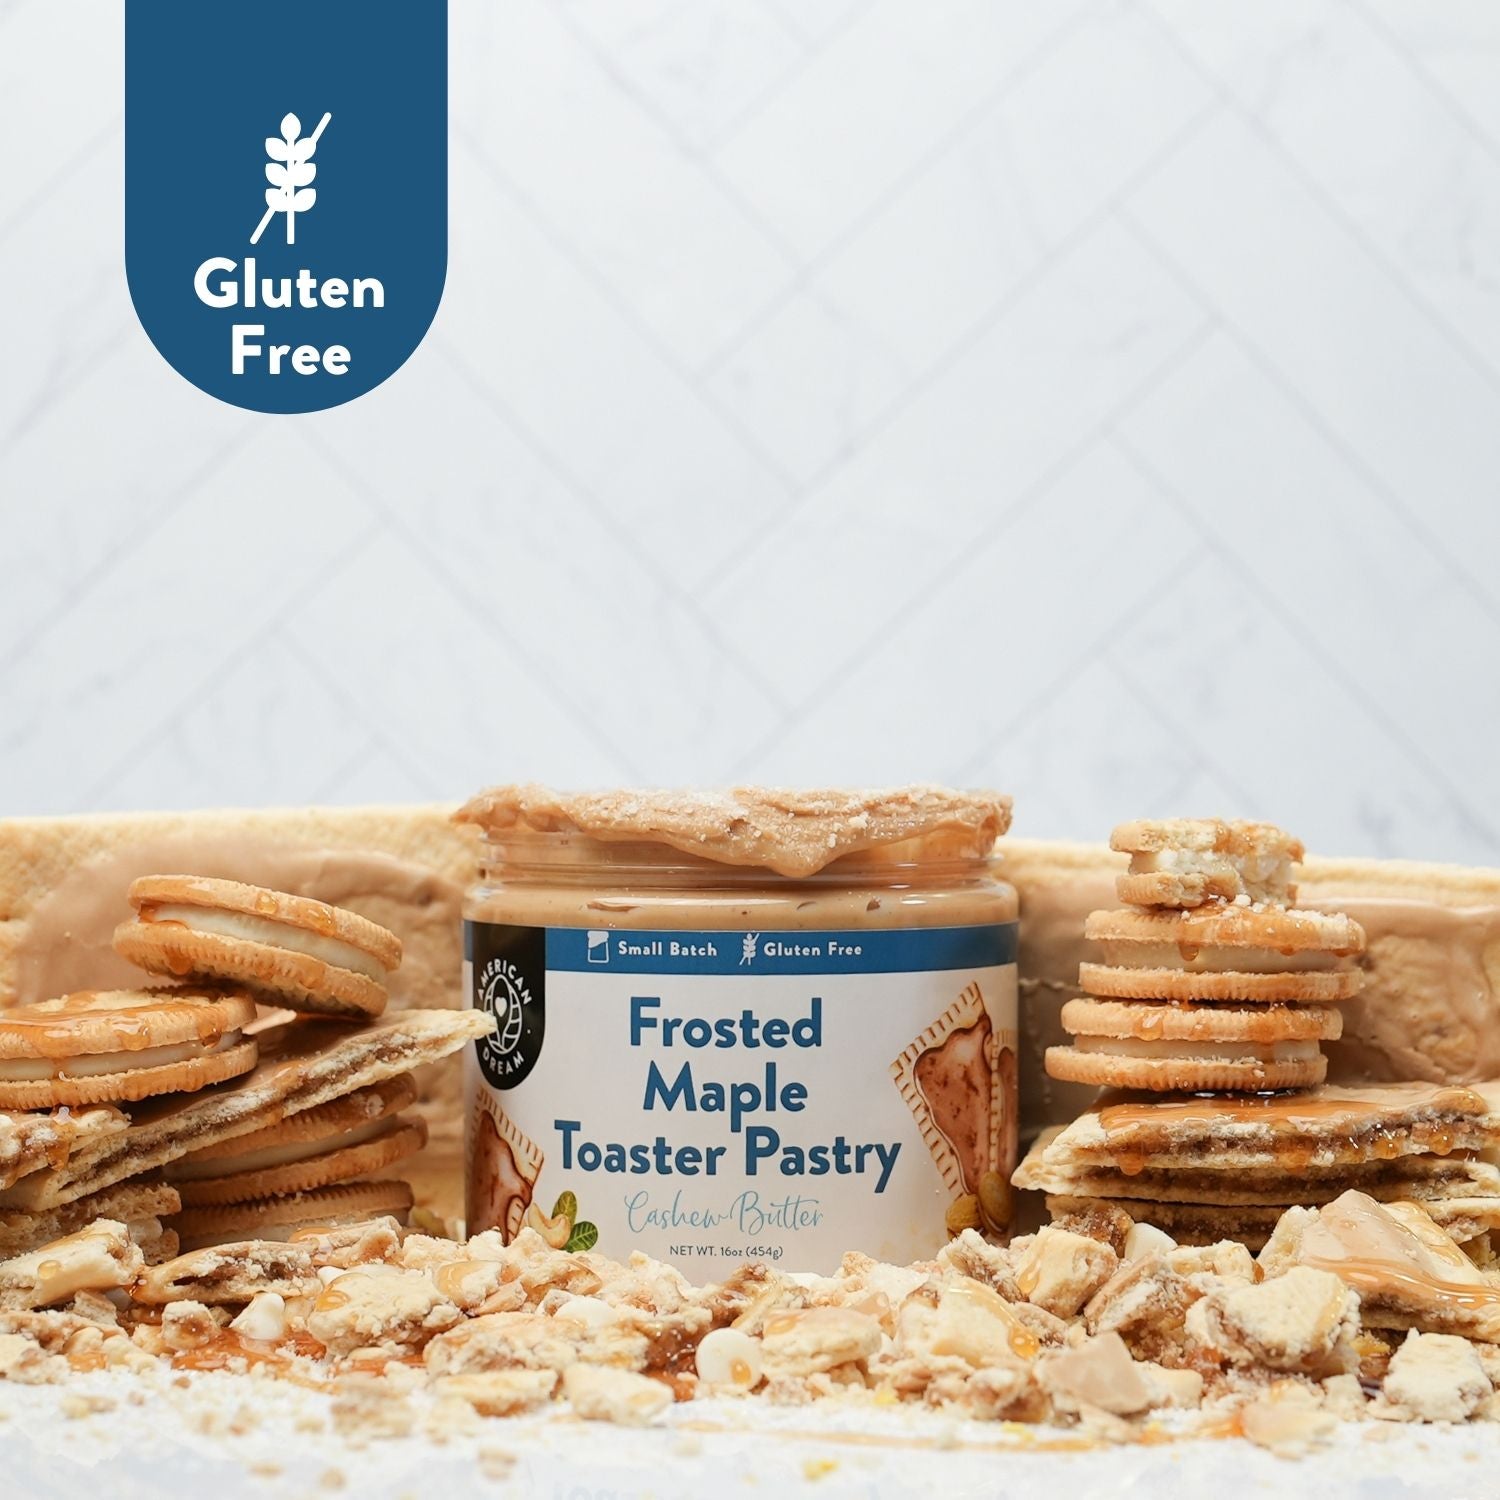 Gluten-Free Frosted Maple Toaster Pastry Cashew Butter